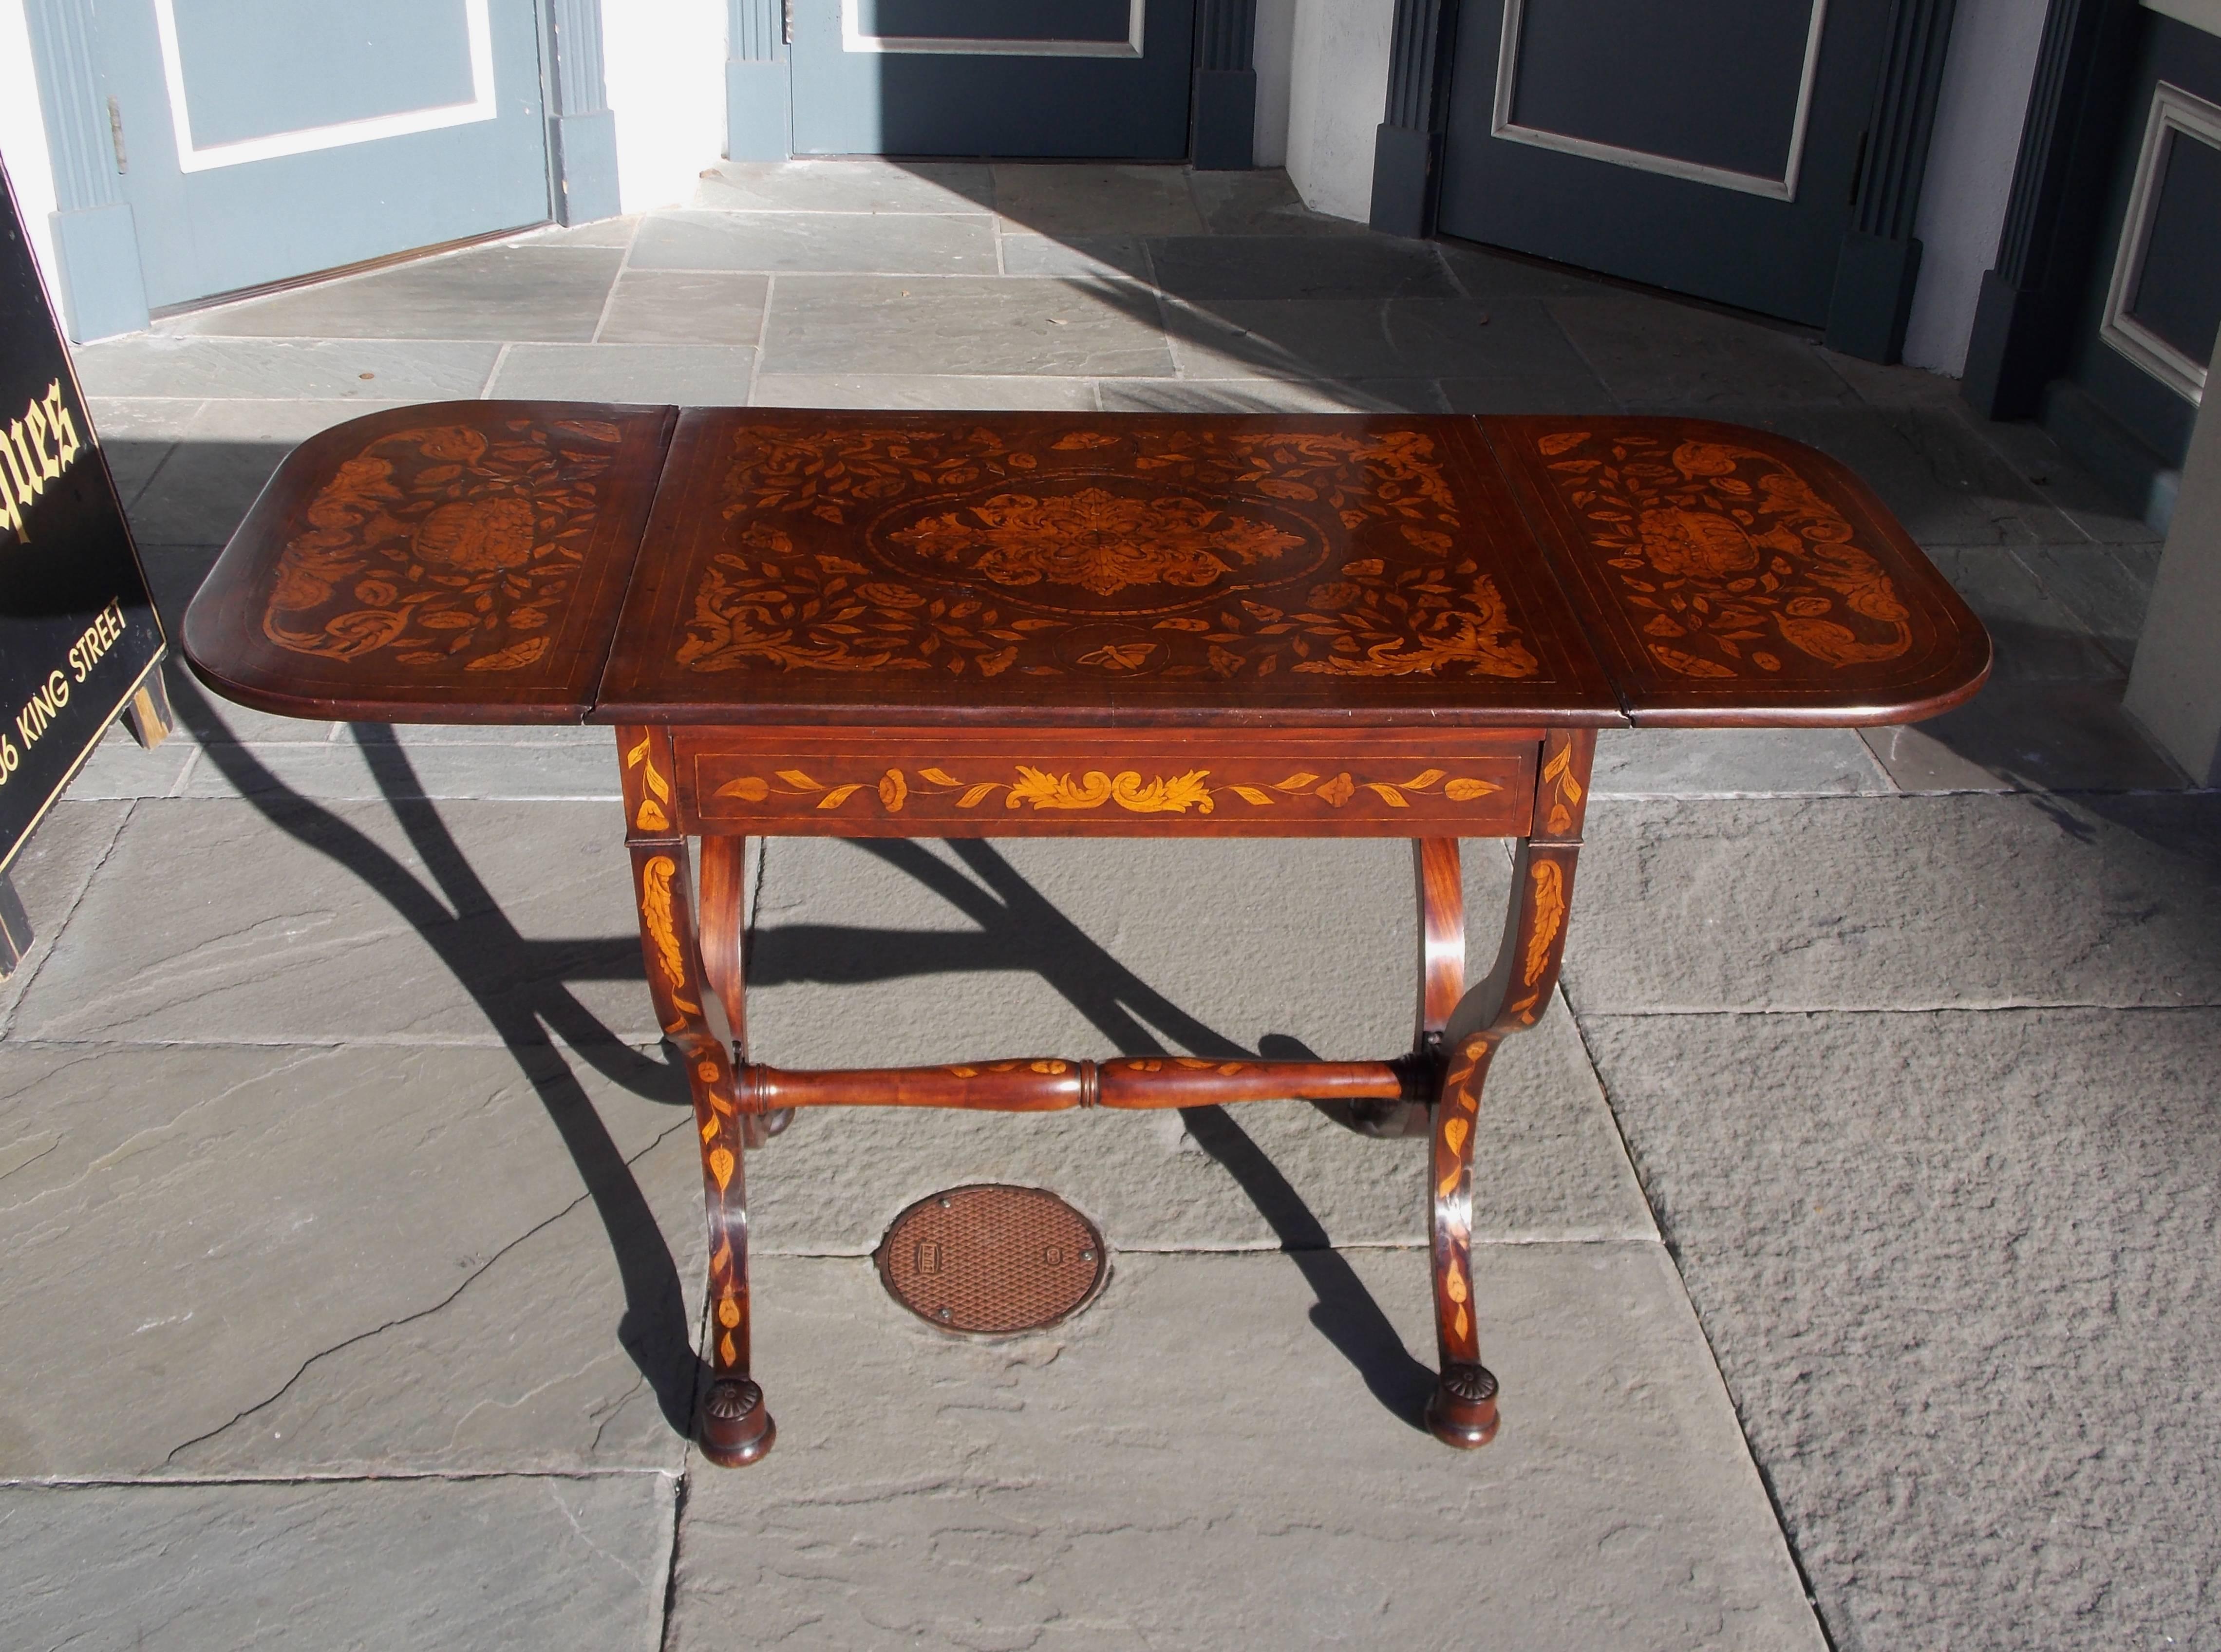 Dutch Regency Kingwood one drawer drop leaf marquetry library table with satinwood inlaid foliage and butterflies, centered decorative inlaid floral medallion, two drop leaves with flanking floral urn baskets, carved rosettes , and terminating on